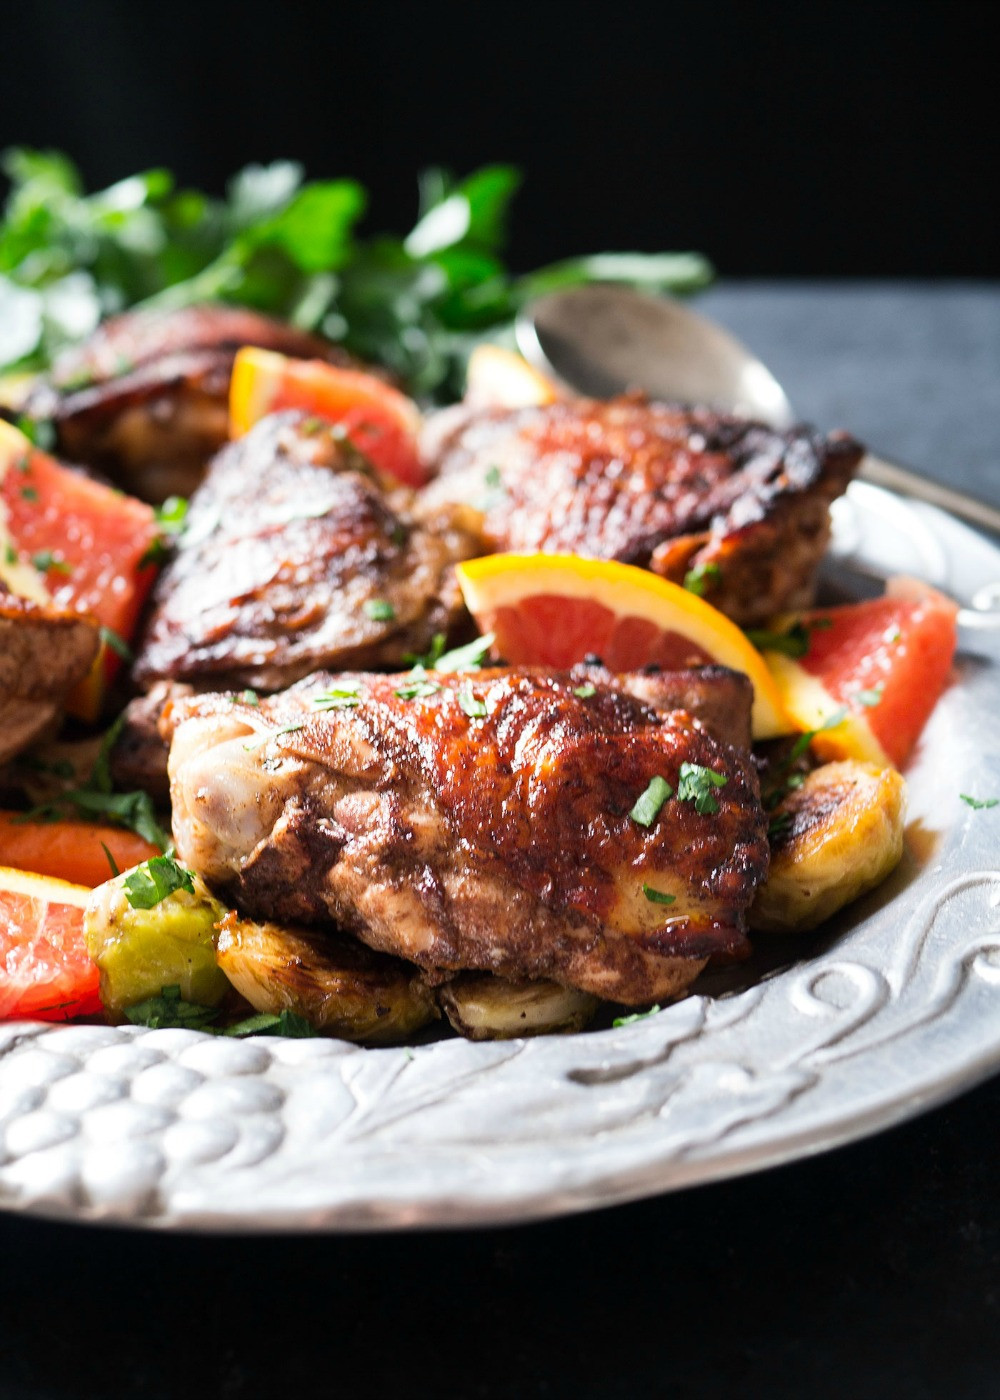 Paleo Chicken Thighs Recipes
 Orange 5 Spice Chicken Thighs with Carrots and Brussels